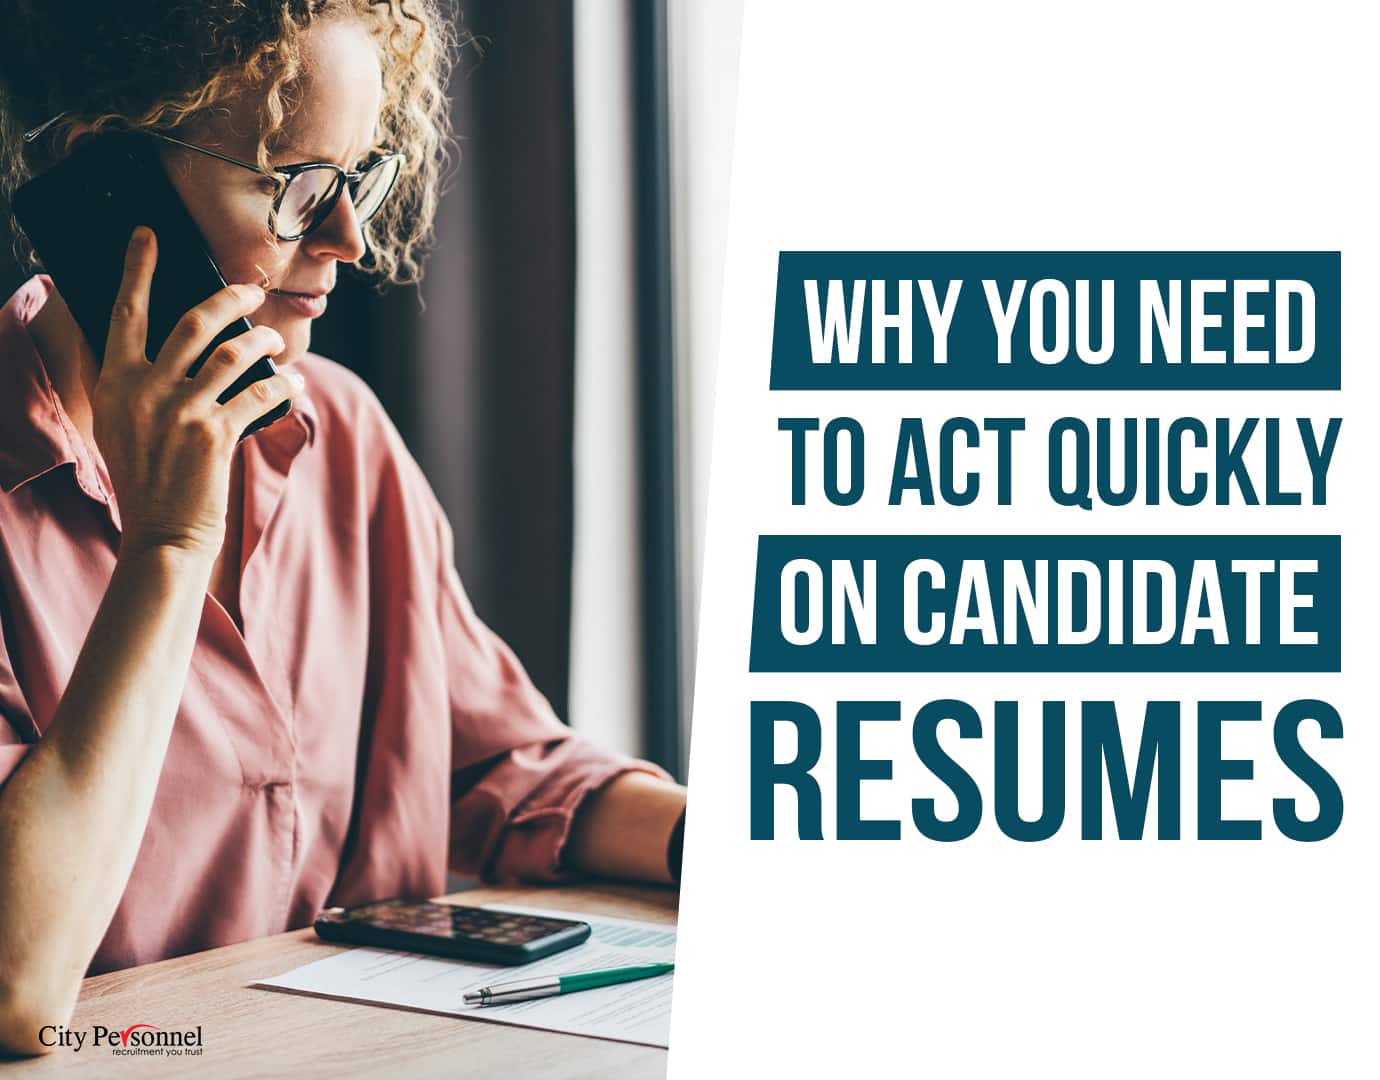 Why You Need to Act Quickly on Candidate Resumes